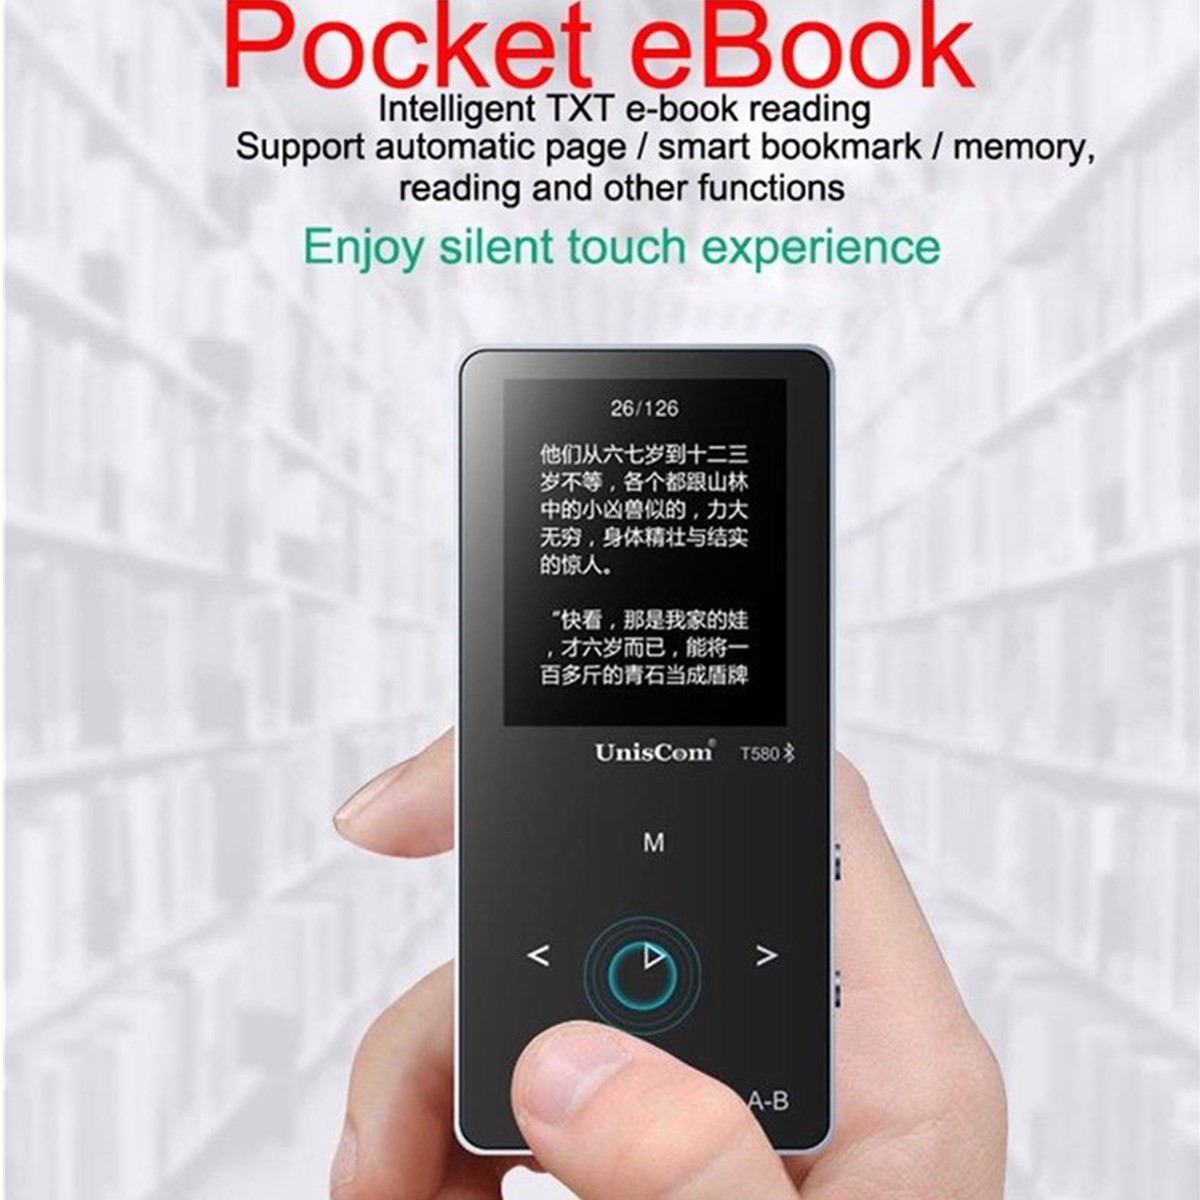 Uniscom 8G 1.8 Inch Screen bluetooth Lossless HIFI MP3 Music Player Support A-B Repeat Voice Record 28